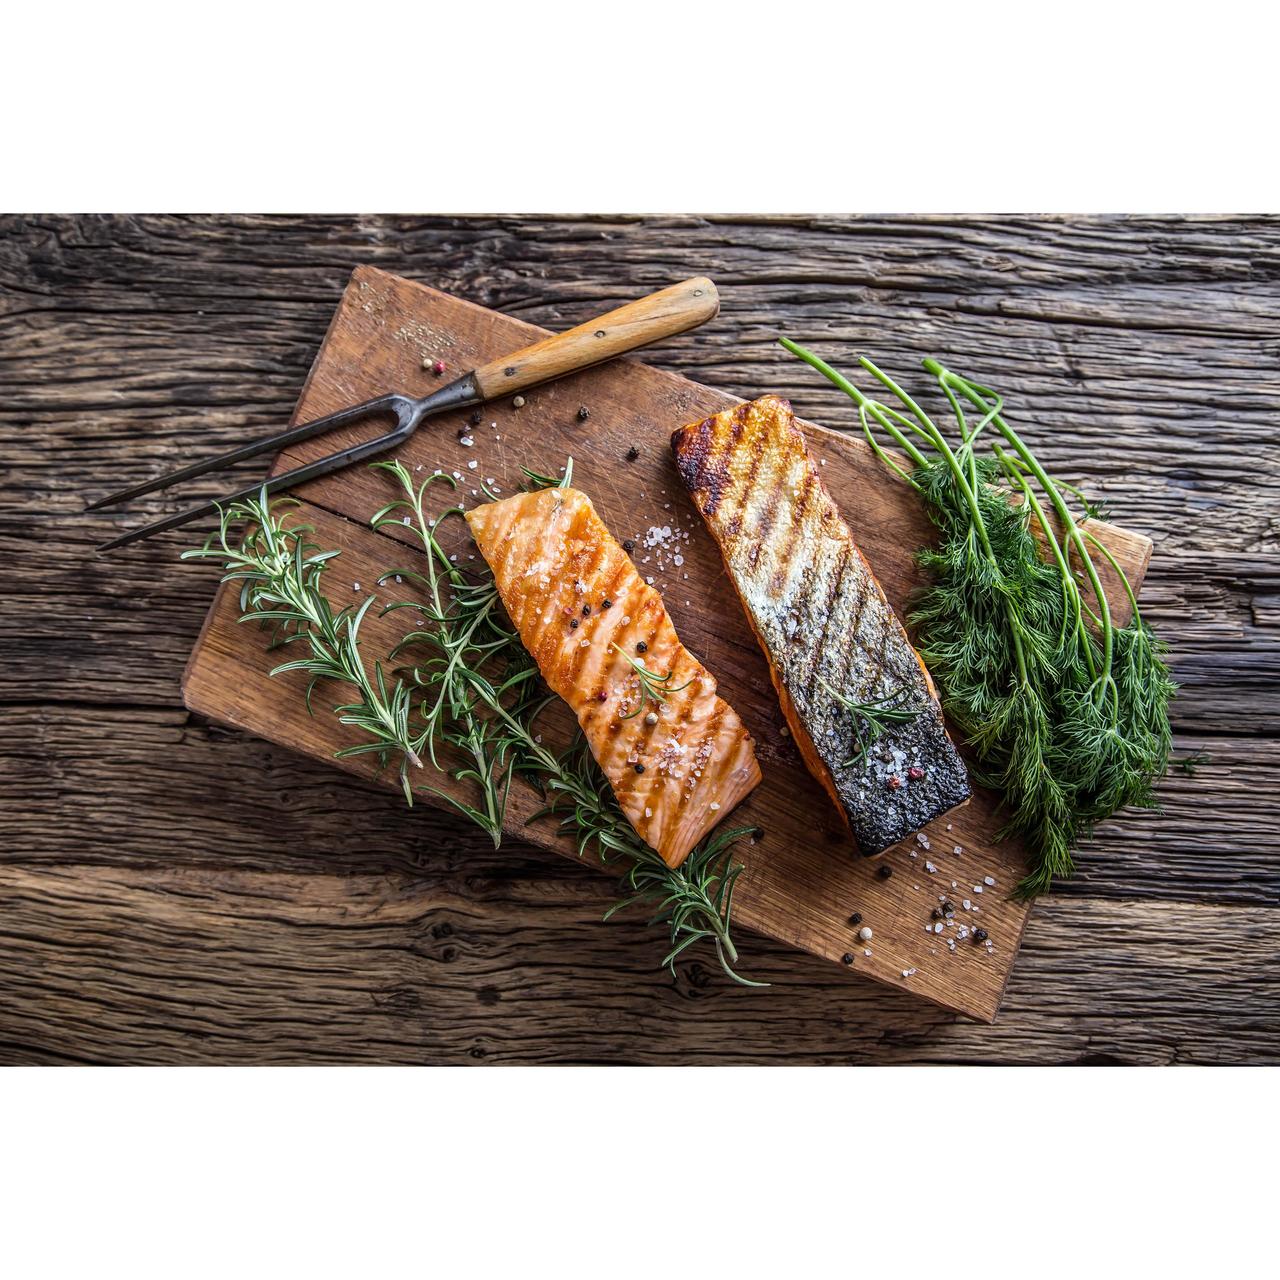 Russell's Organic Salmon Fillets Typically: 270g